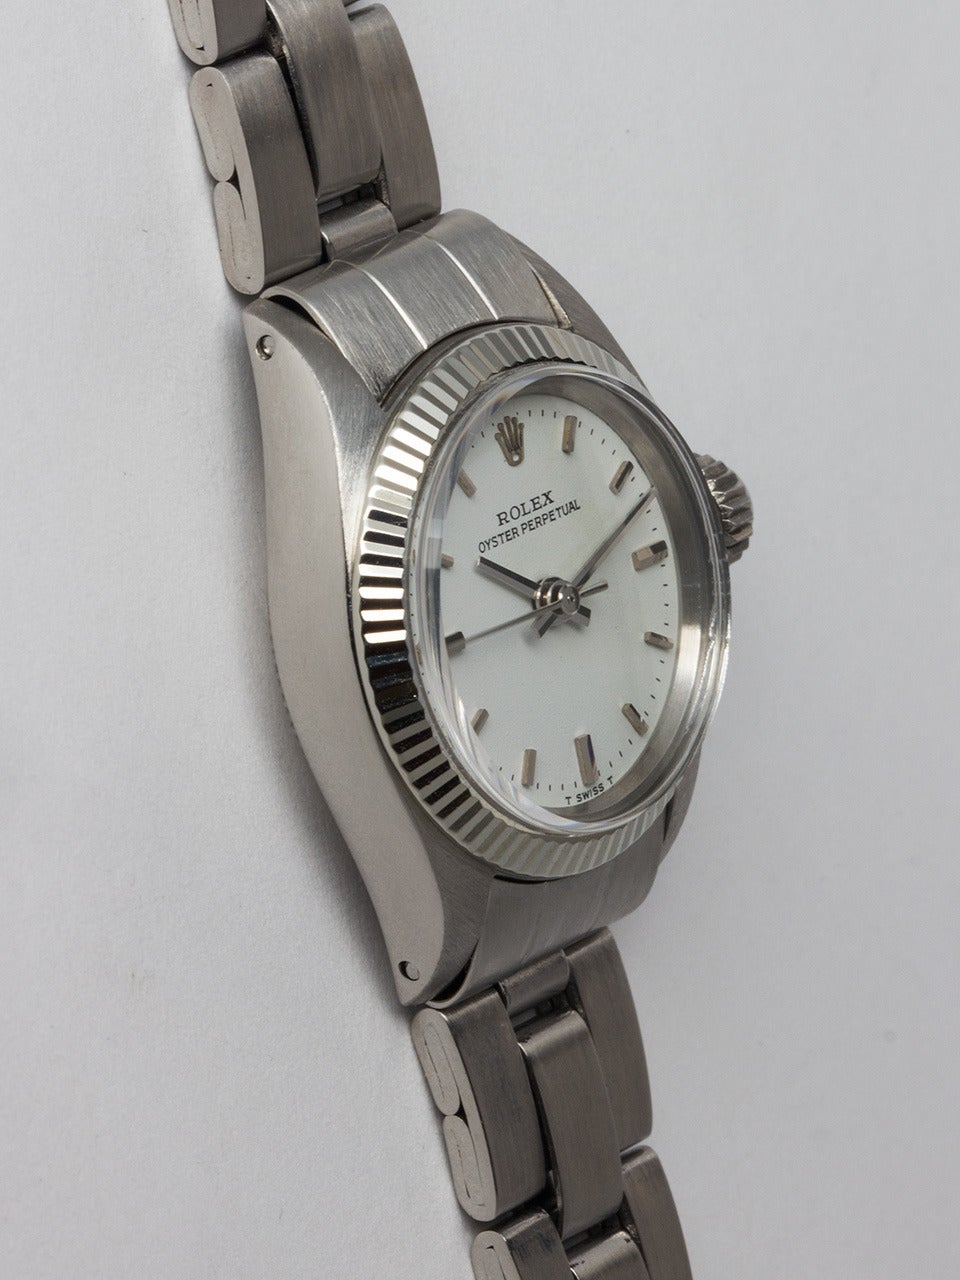 Lady's Rolex Stainless Steel Oyster Perpetual Wristwatch ref 6719 serial # 3.3 million circa 1972. 25 mm diameter Oyster case with wide 14K white gold fluted bezel and acrylic crystal. Very pleasing antique white original dial with applied silver